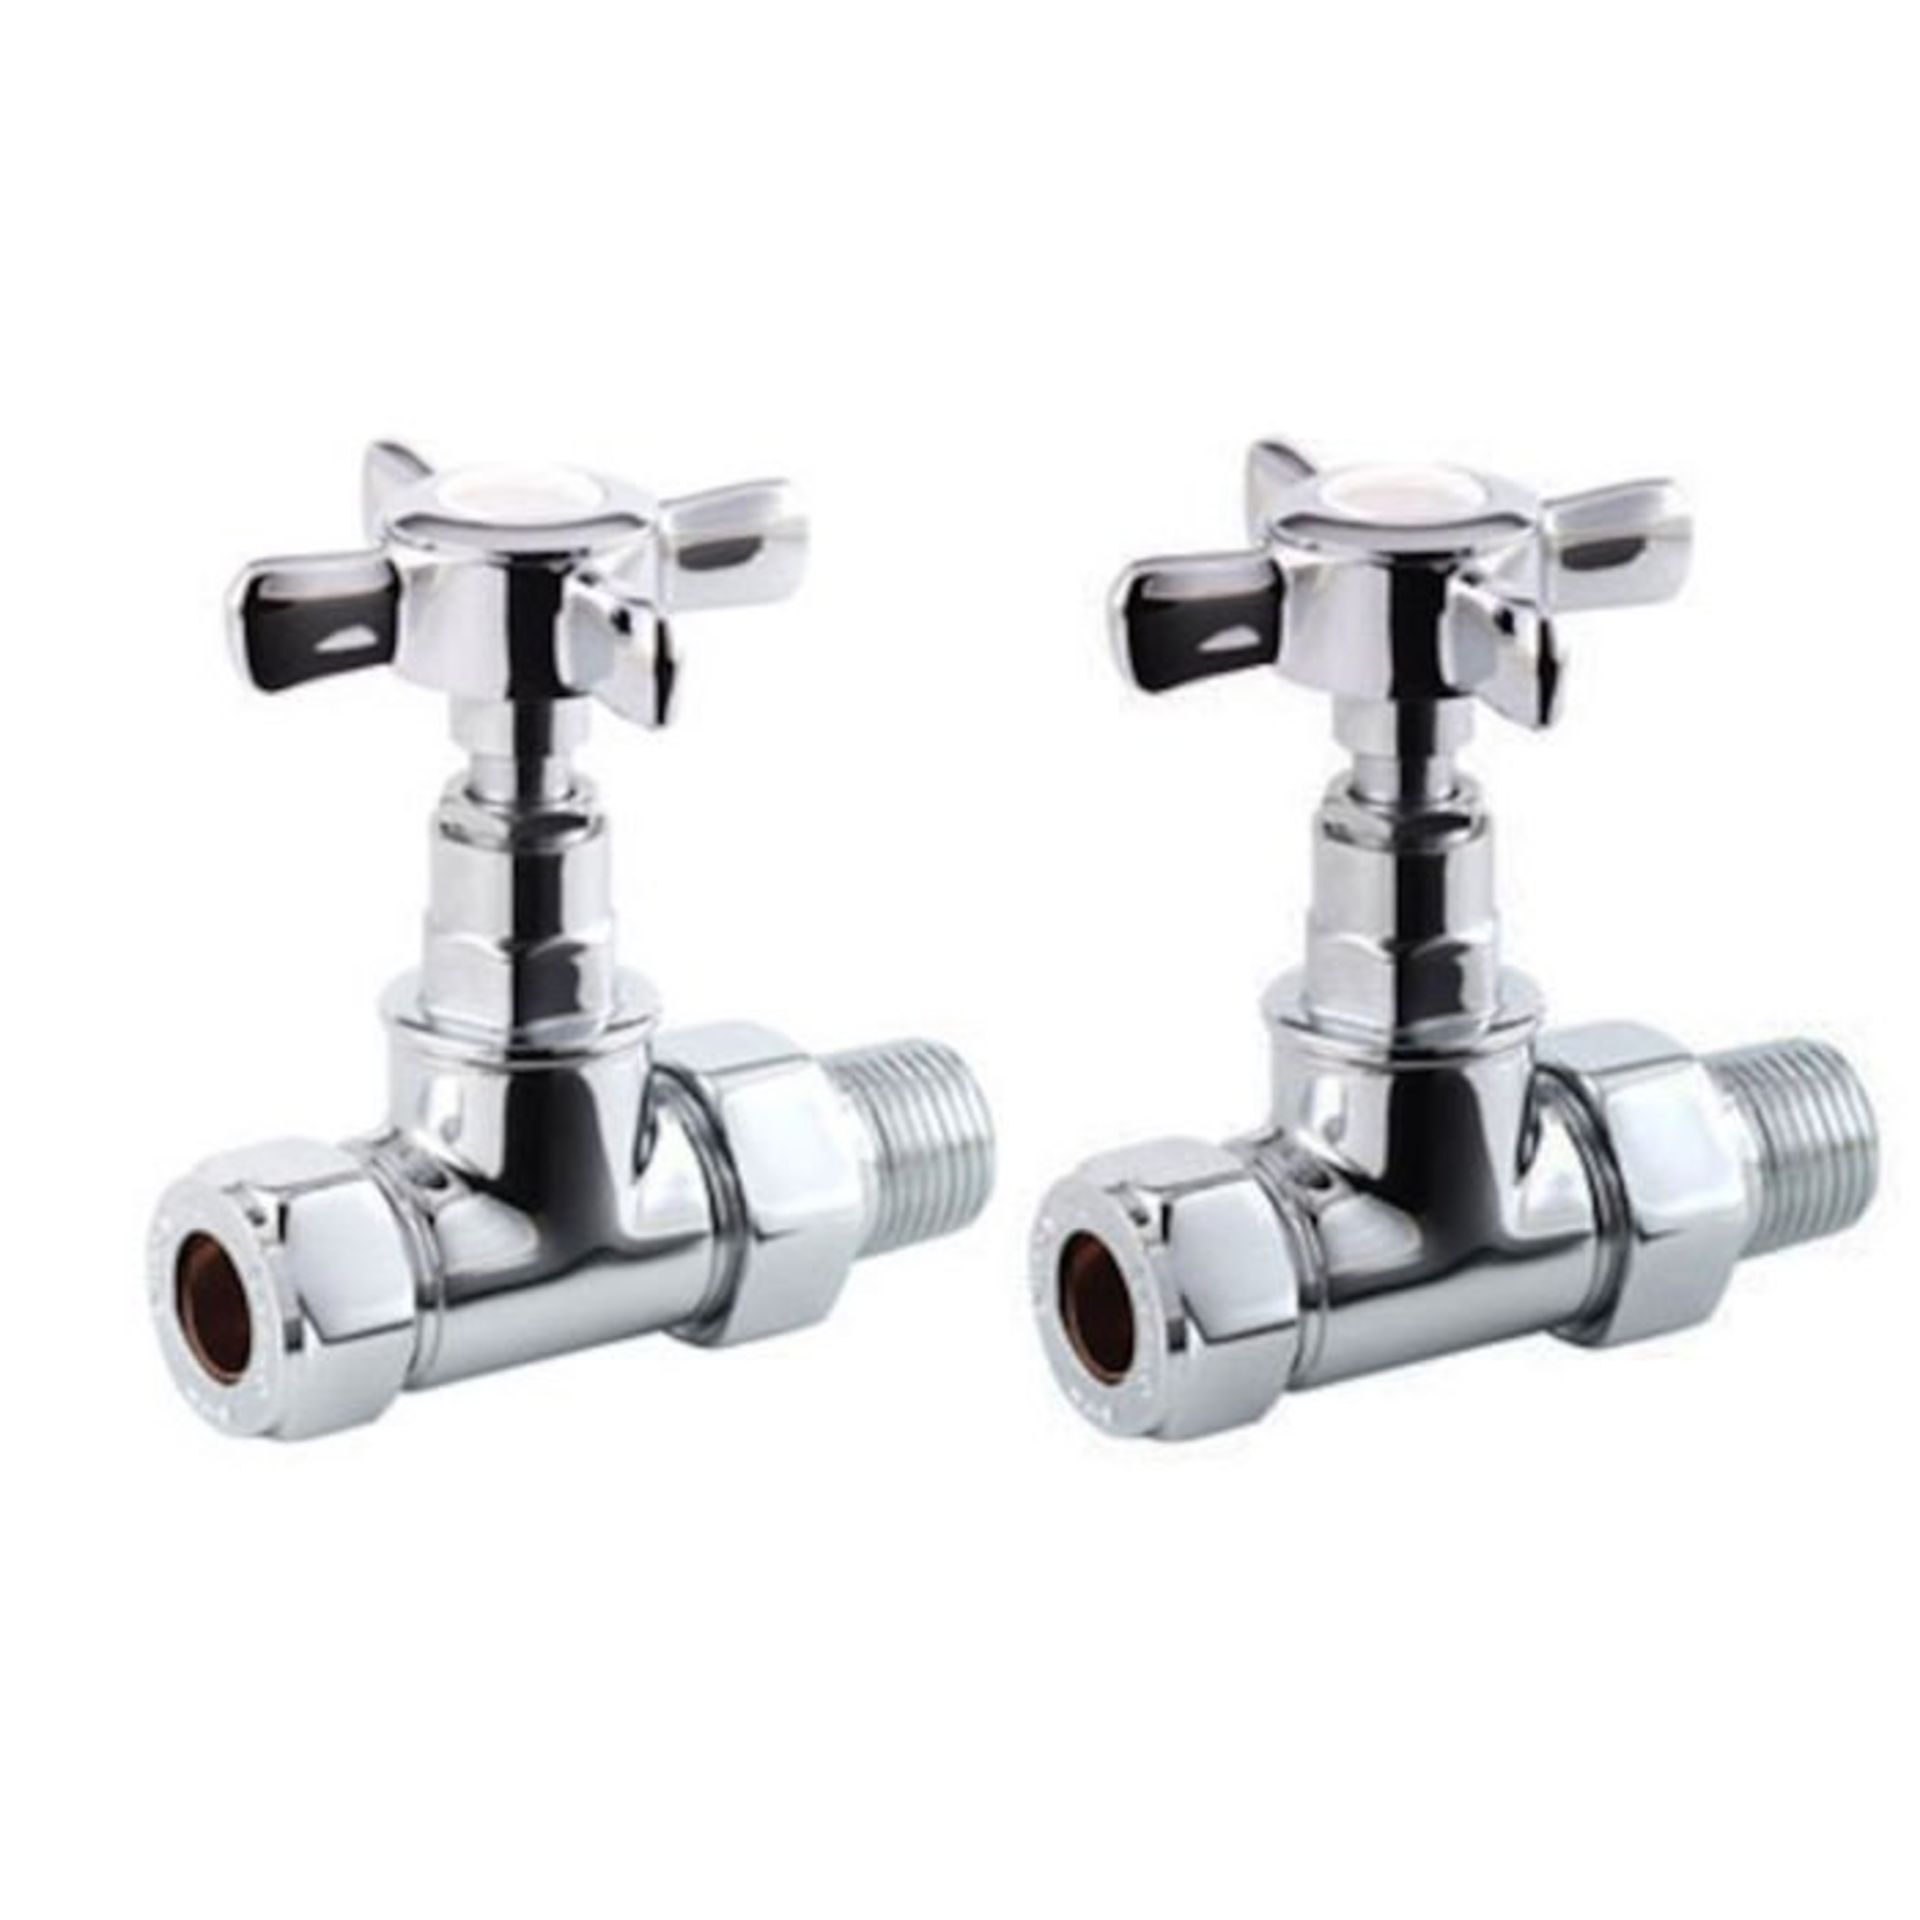 (L100) 15mm Standard Connection Straight Polished Chrome Radiator Valves. Chrome Plated Solid